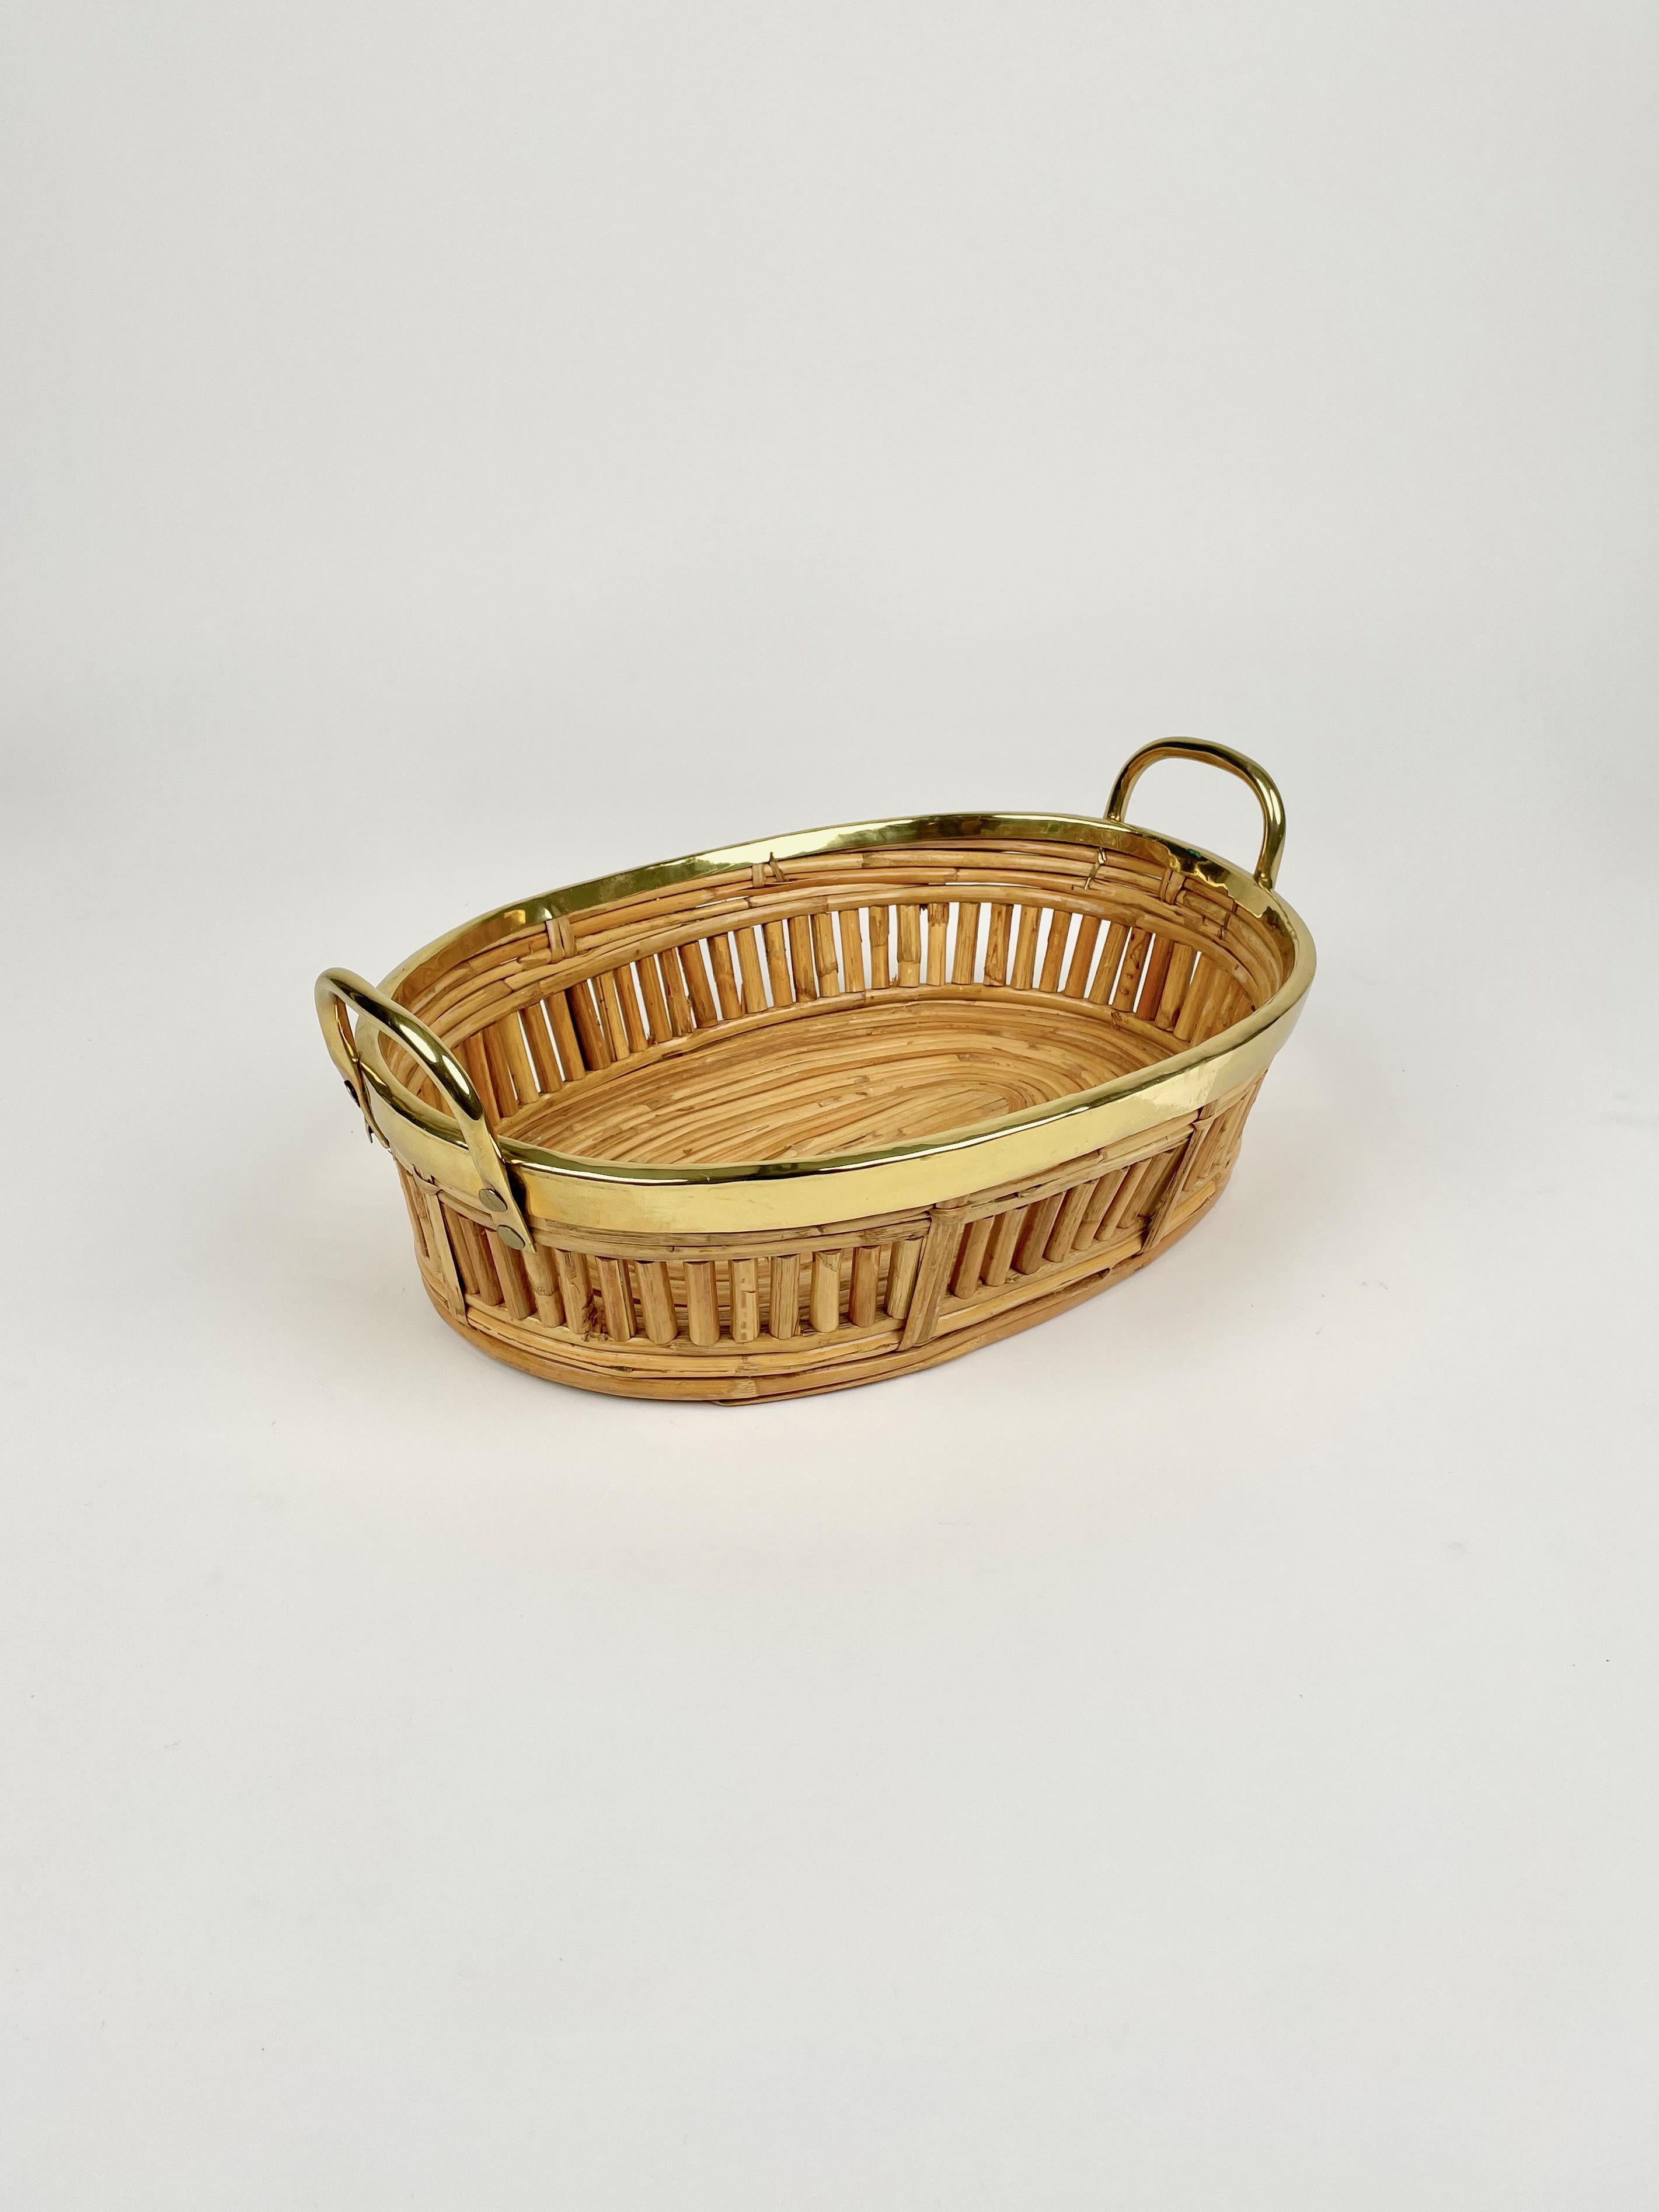 Midcentury Centerpiece Basket Rattan and Brass, Italy 1970s For Sale 2